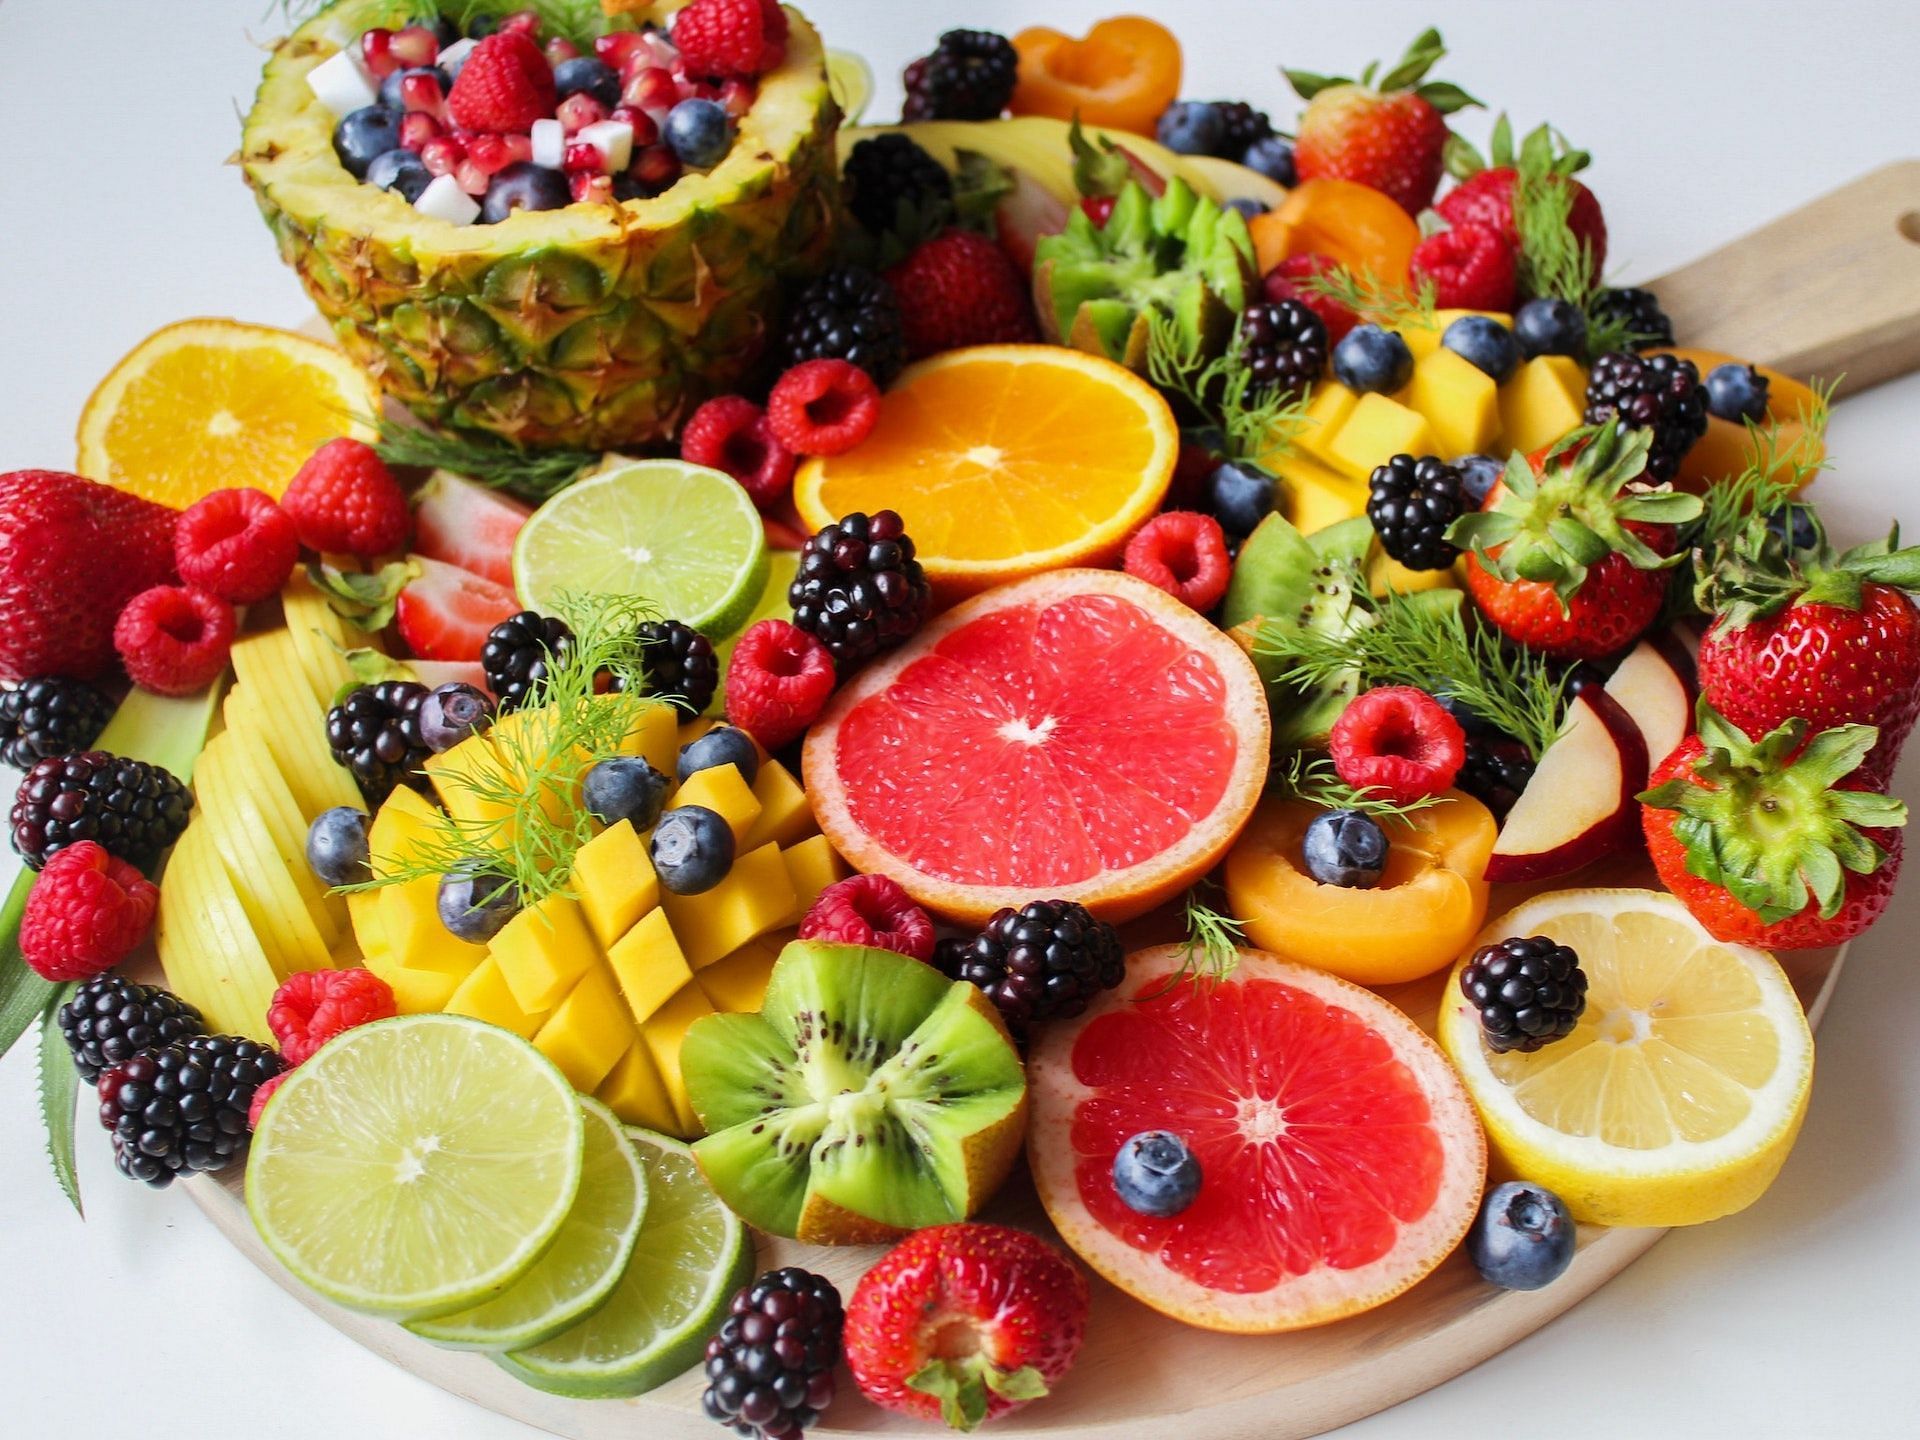 What is the best time to eat fruits? (Photo via Pexels/Jane Doan)